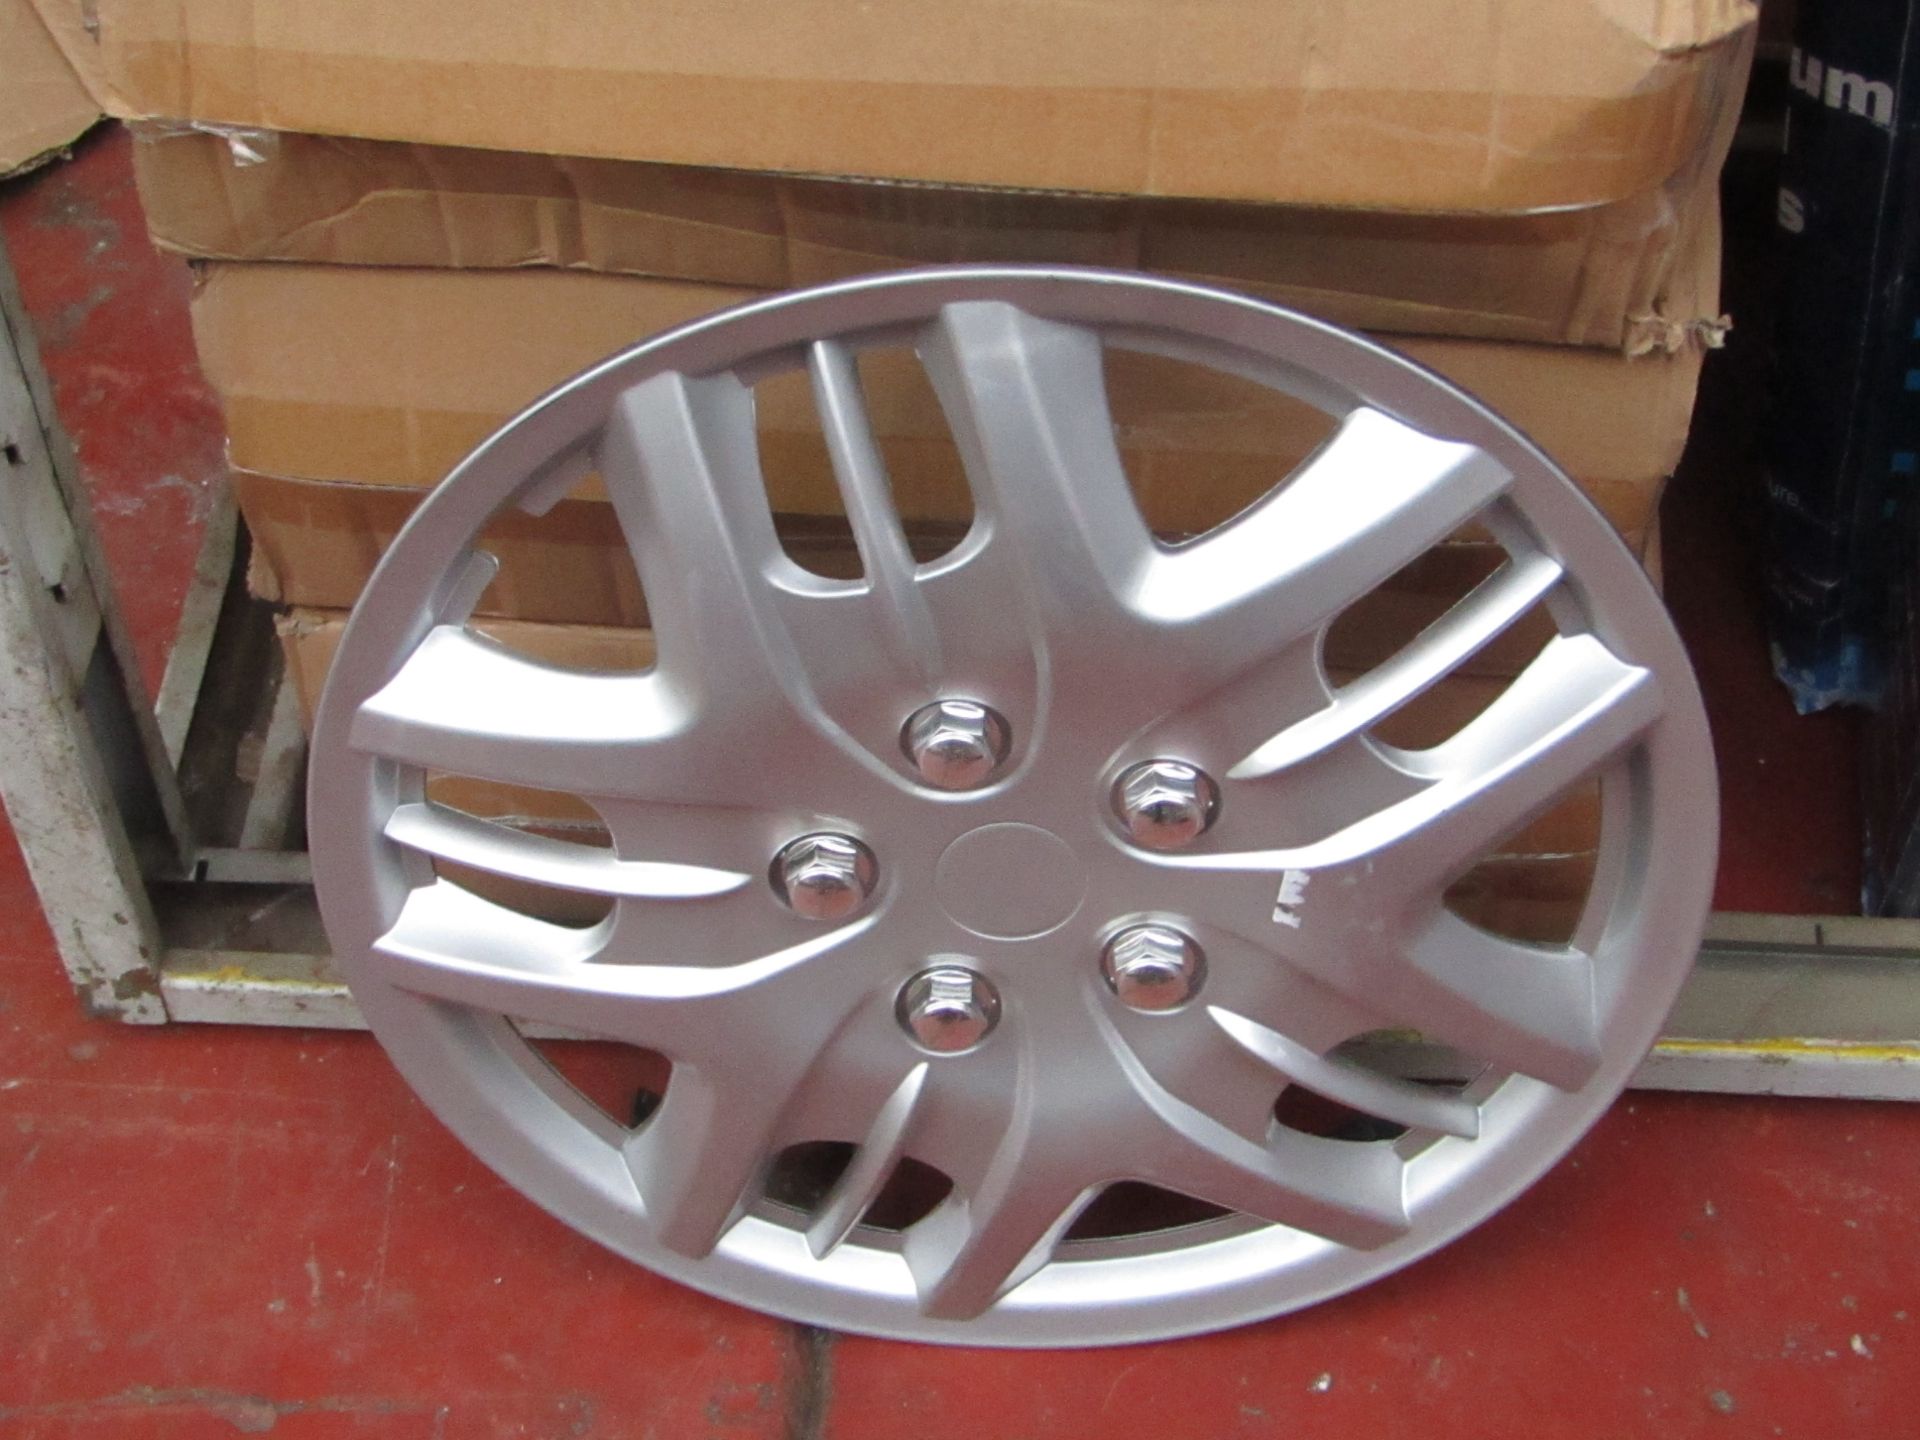 Streetwize 15" wheel trims, unchecked and boxed.